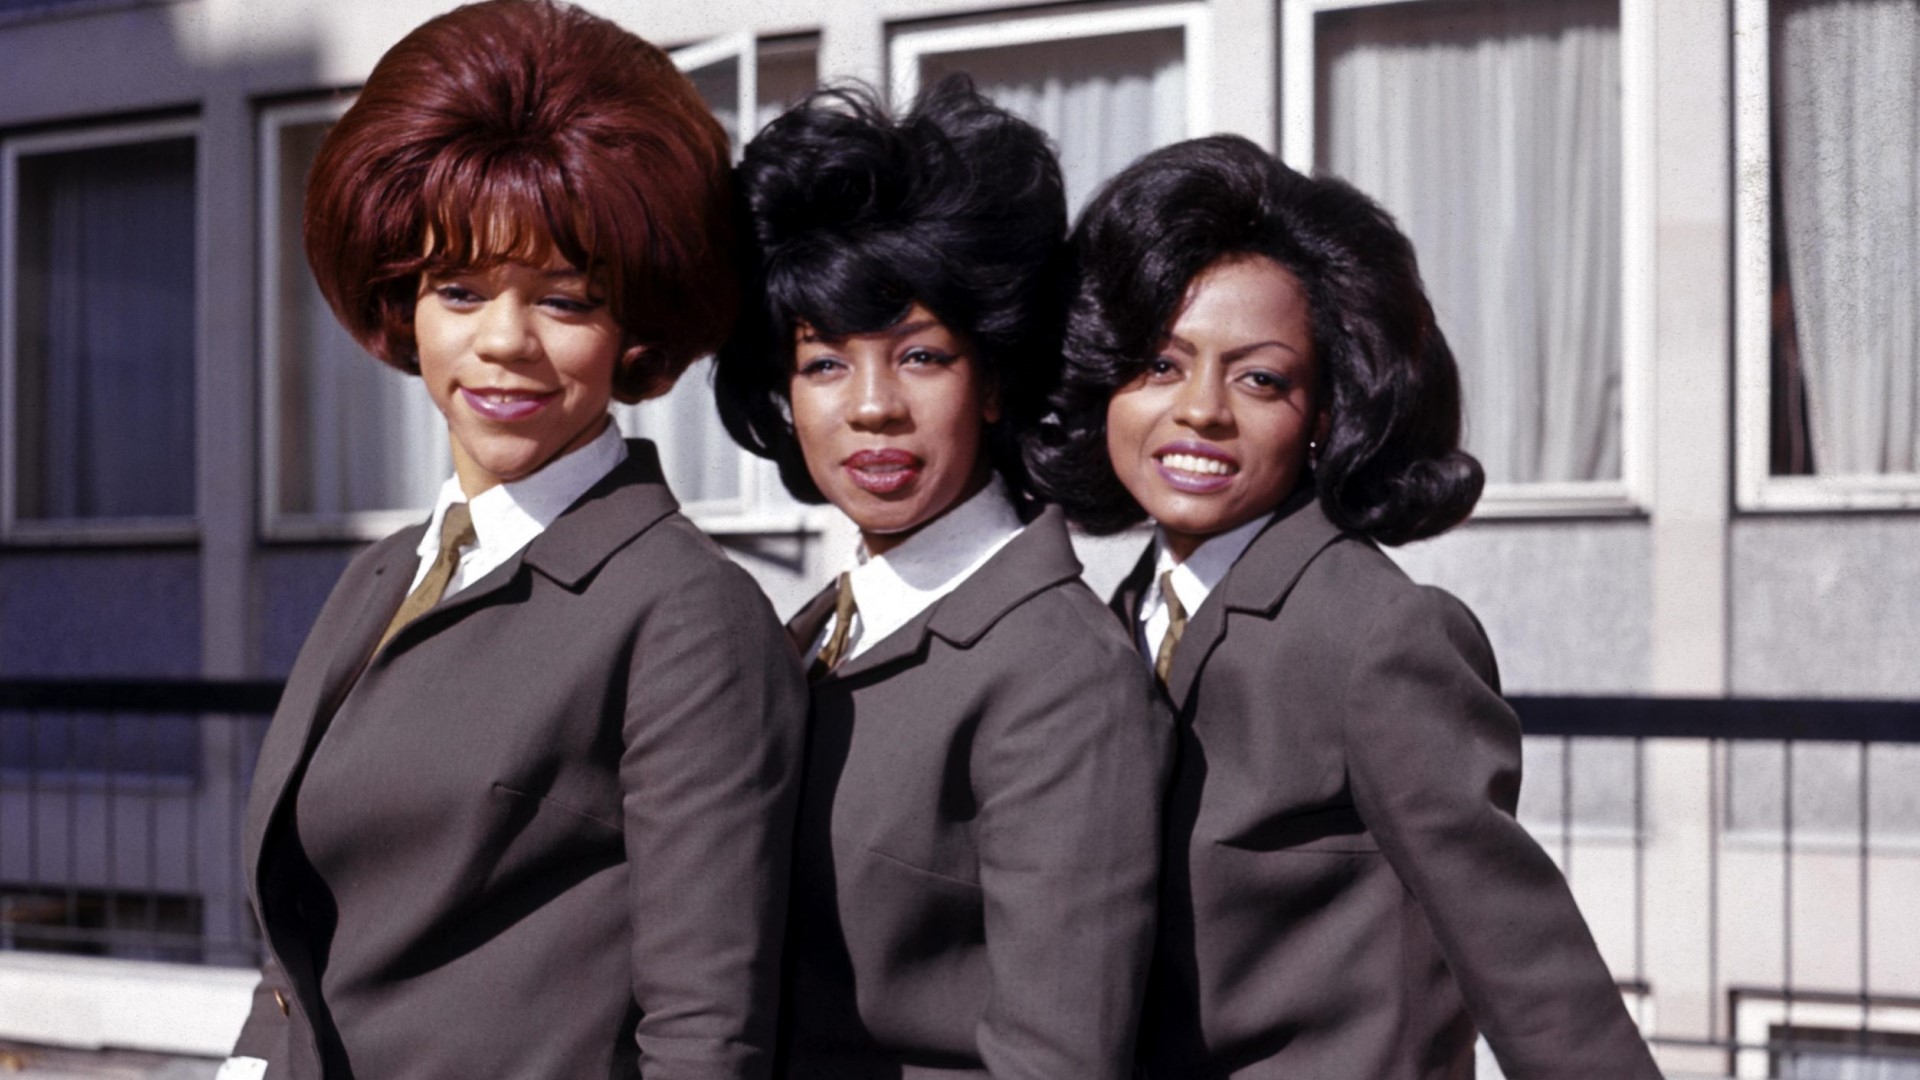 Classic girl groups: do you know the singers' names?